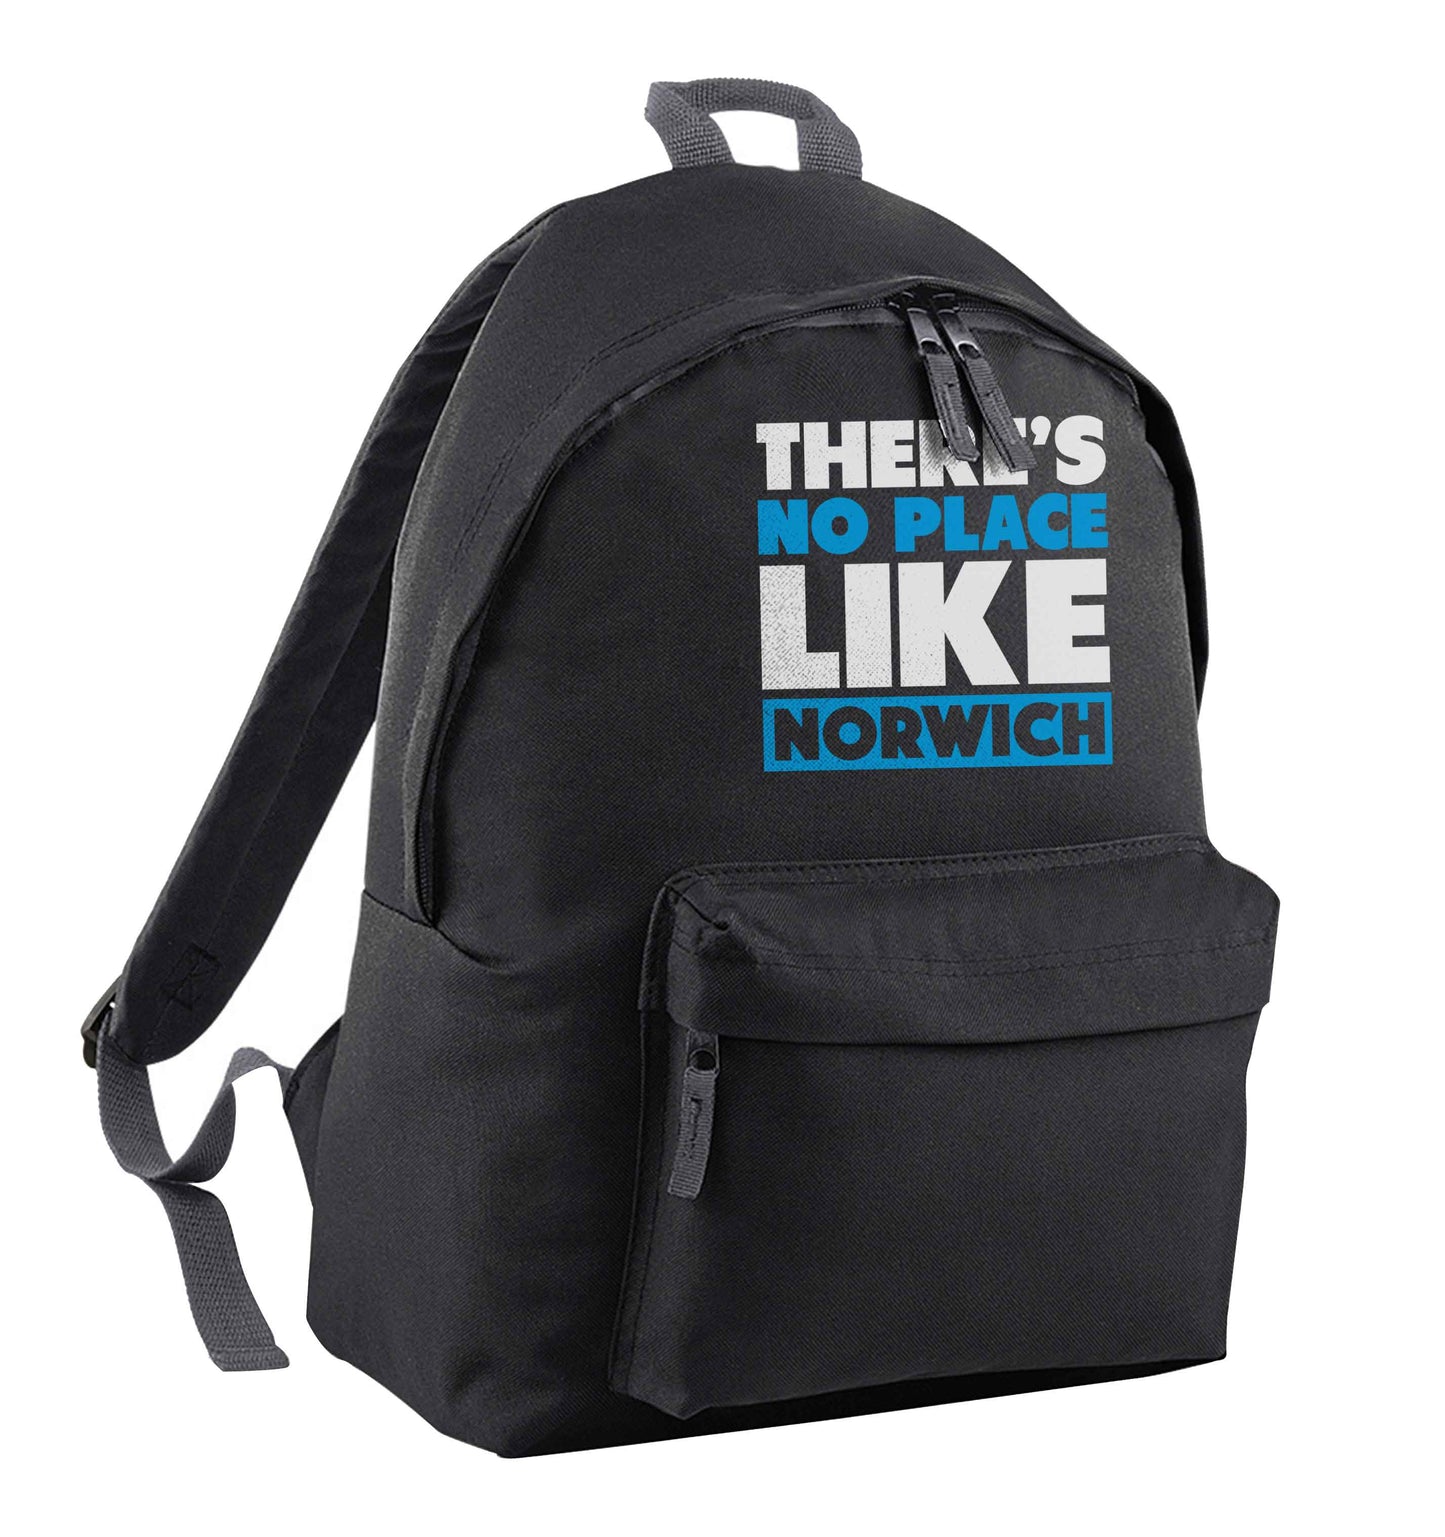 There's no place like Norwich black adults backpack